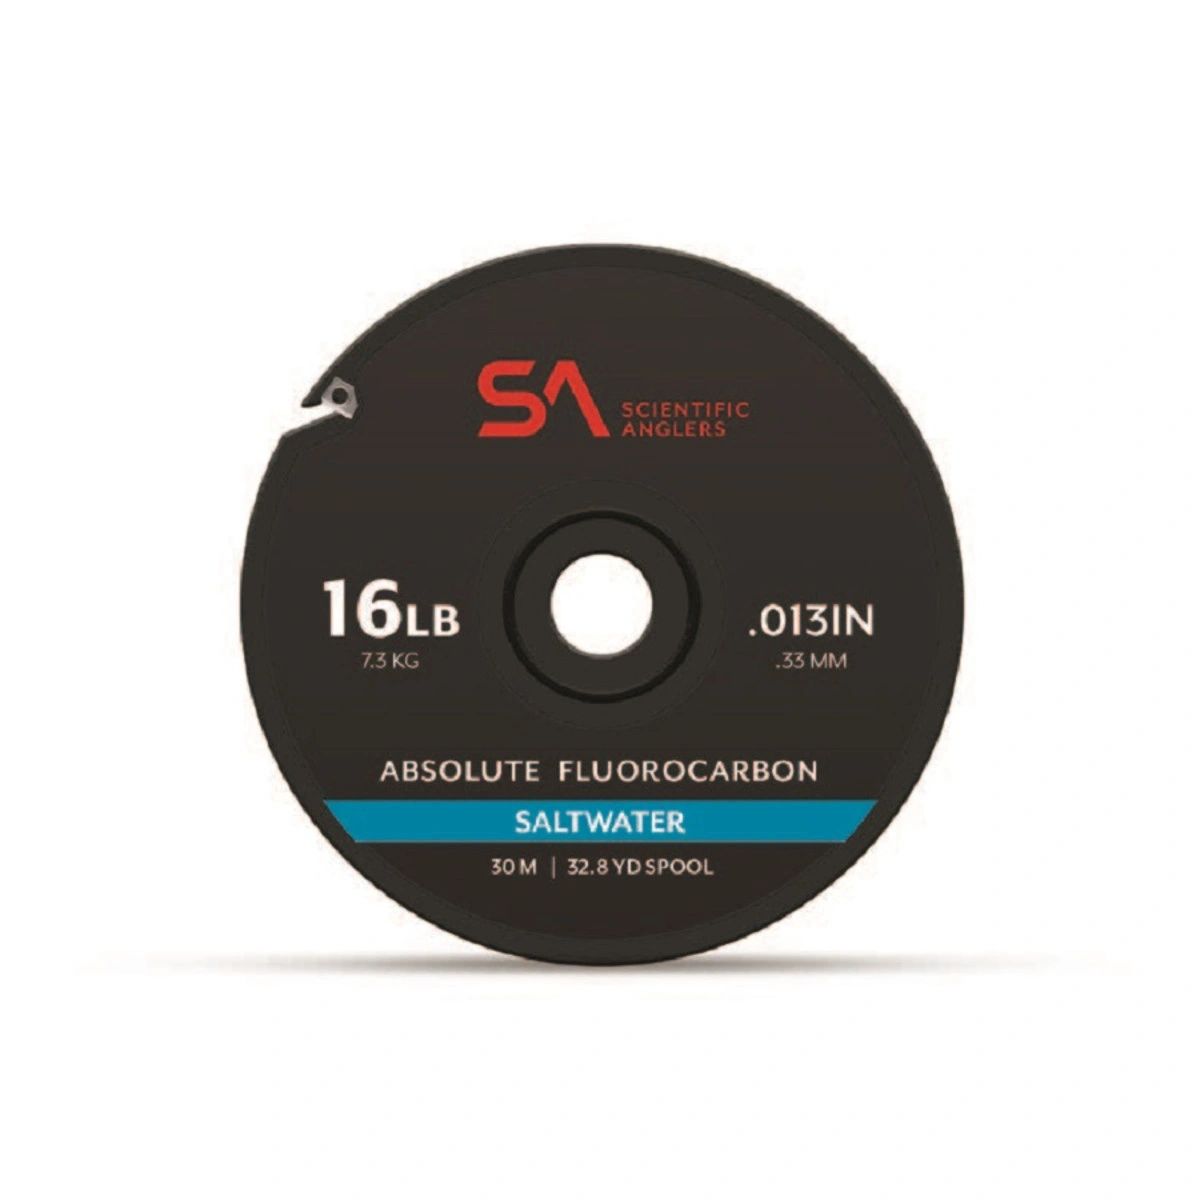 SCIENTIFIC ANGLERS ABSOLUTE FLUOROCARBON SALTWATER TIPPET